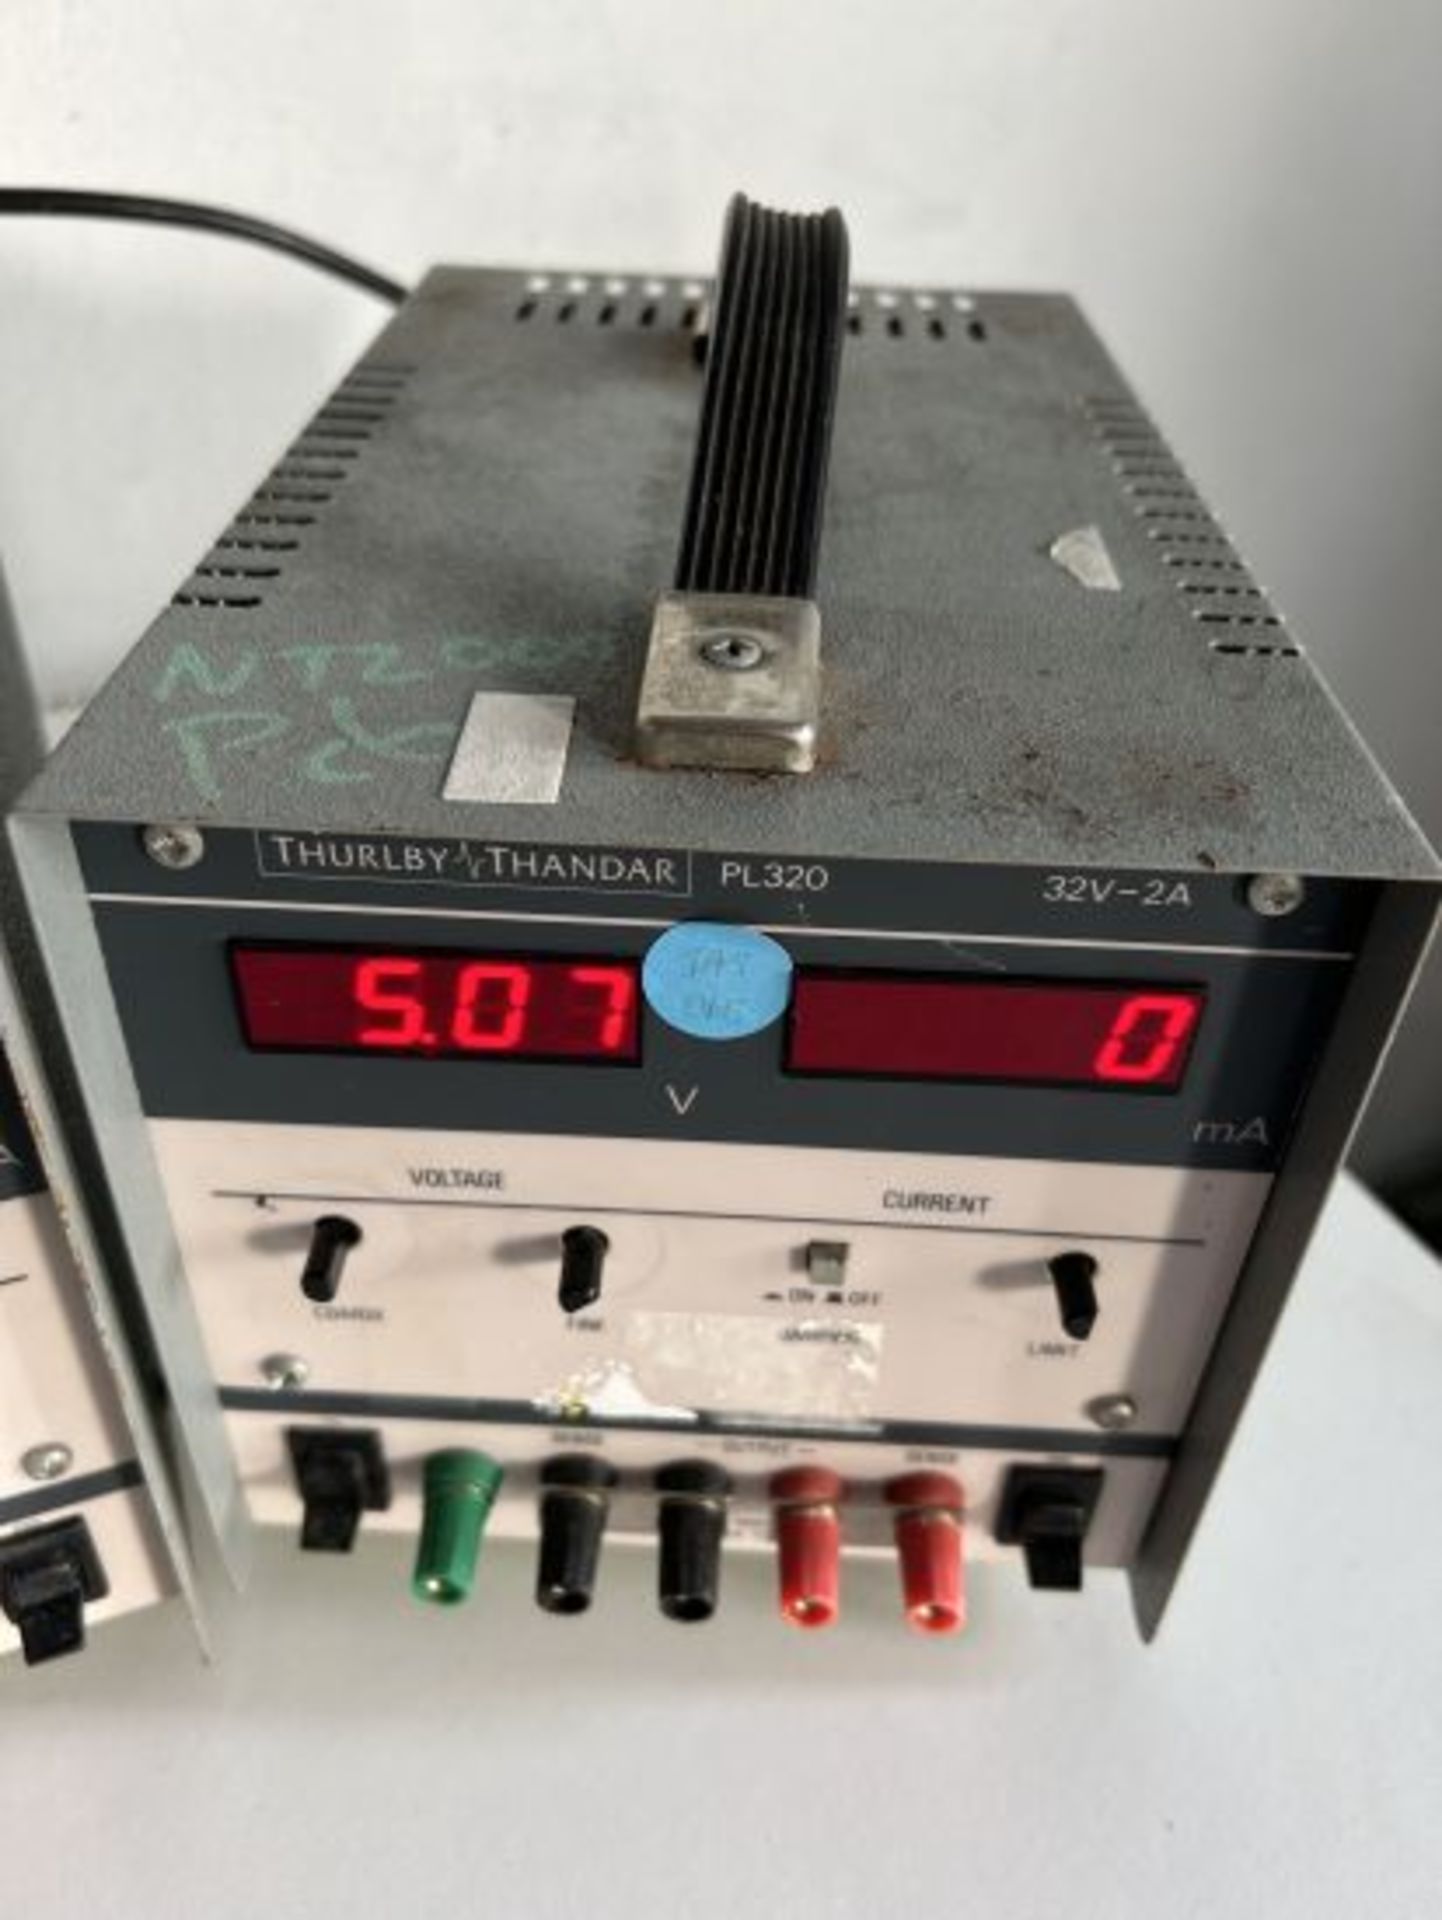 3 x Thurlby Thander PL-320 32V-2A Power Supply Units. - Image 4 of 4